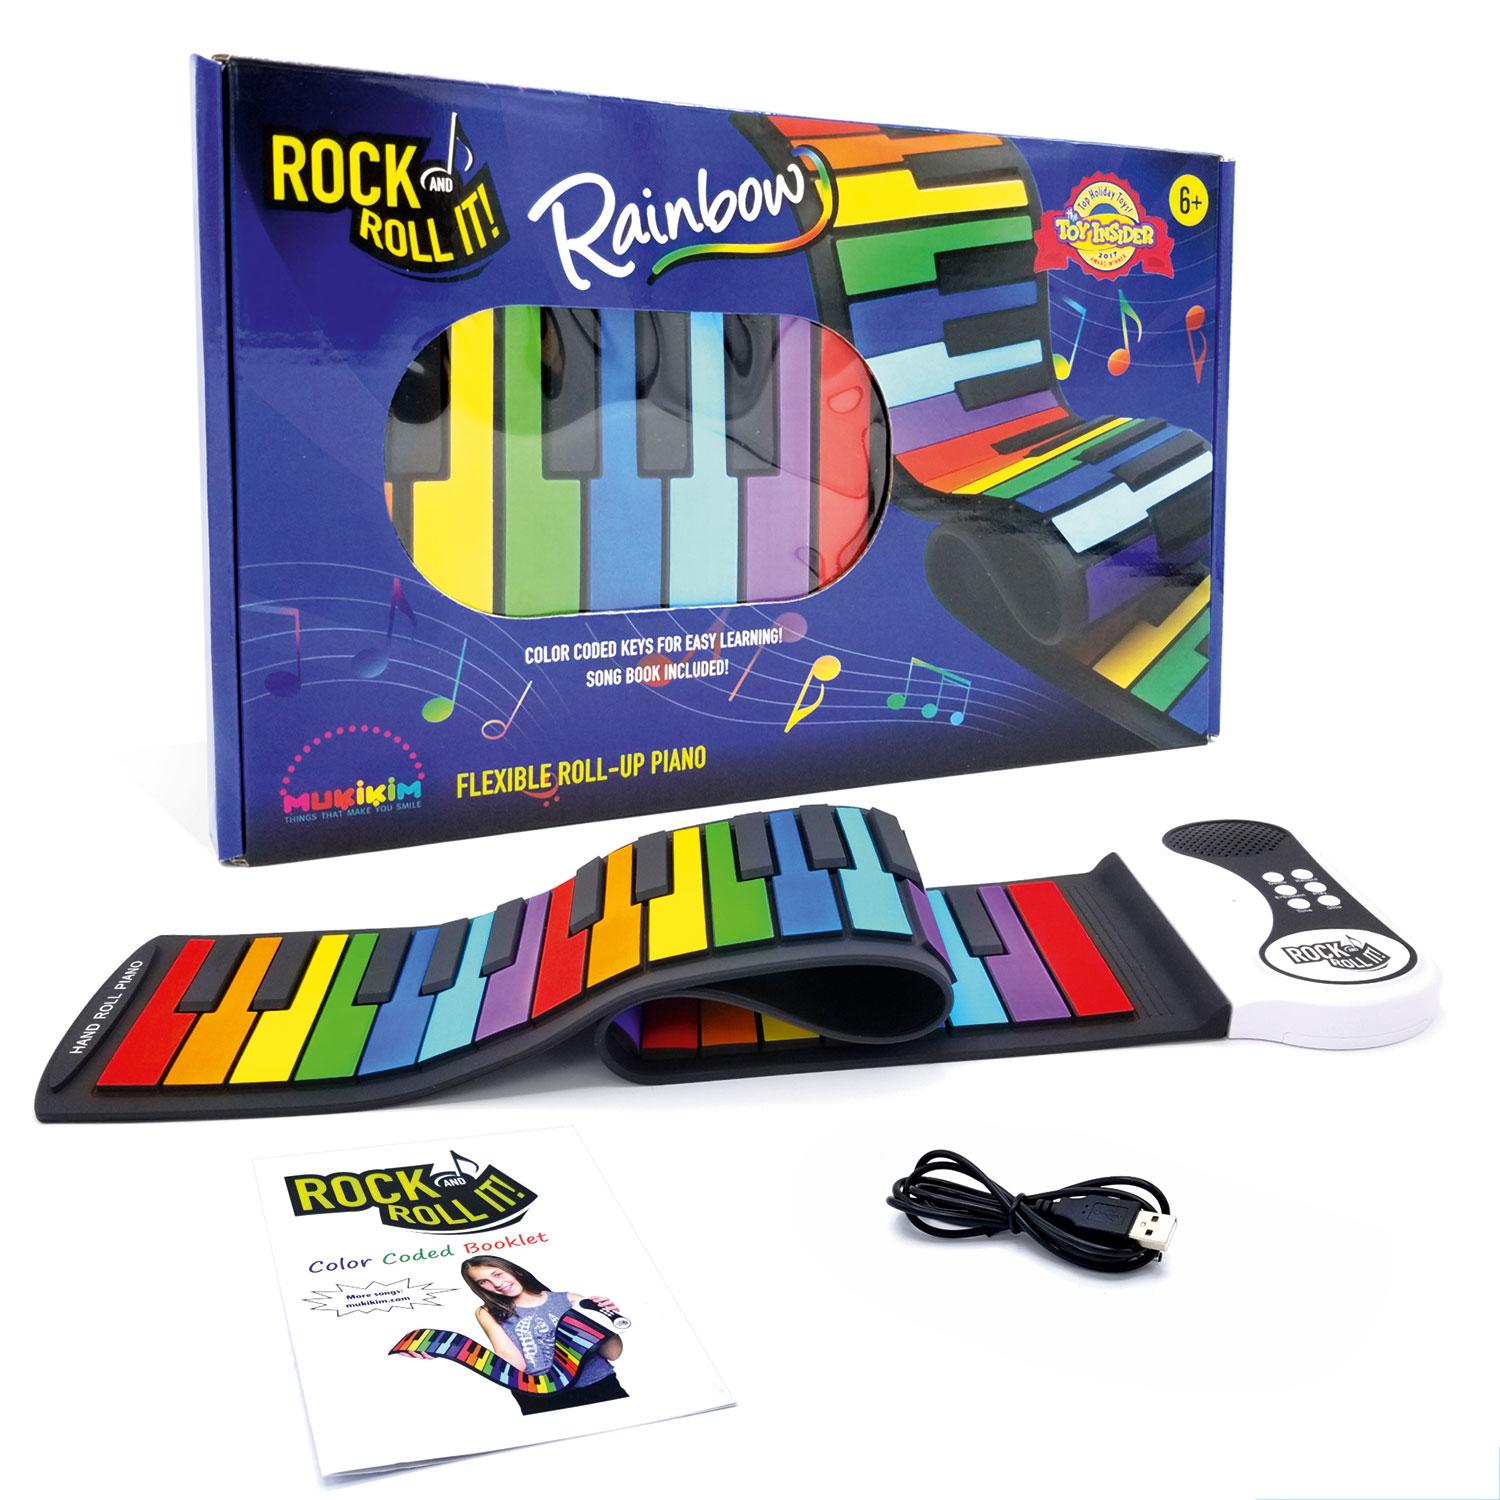 Rock And Roll It! RAINBOW PIANO